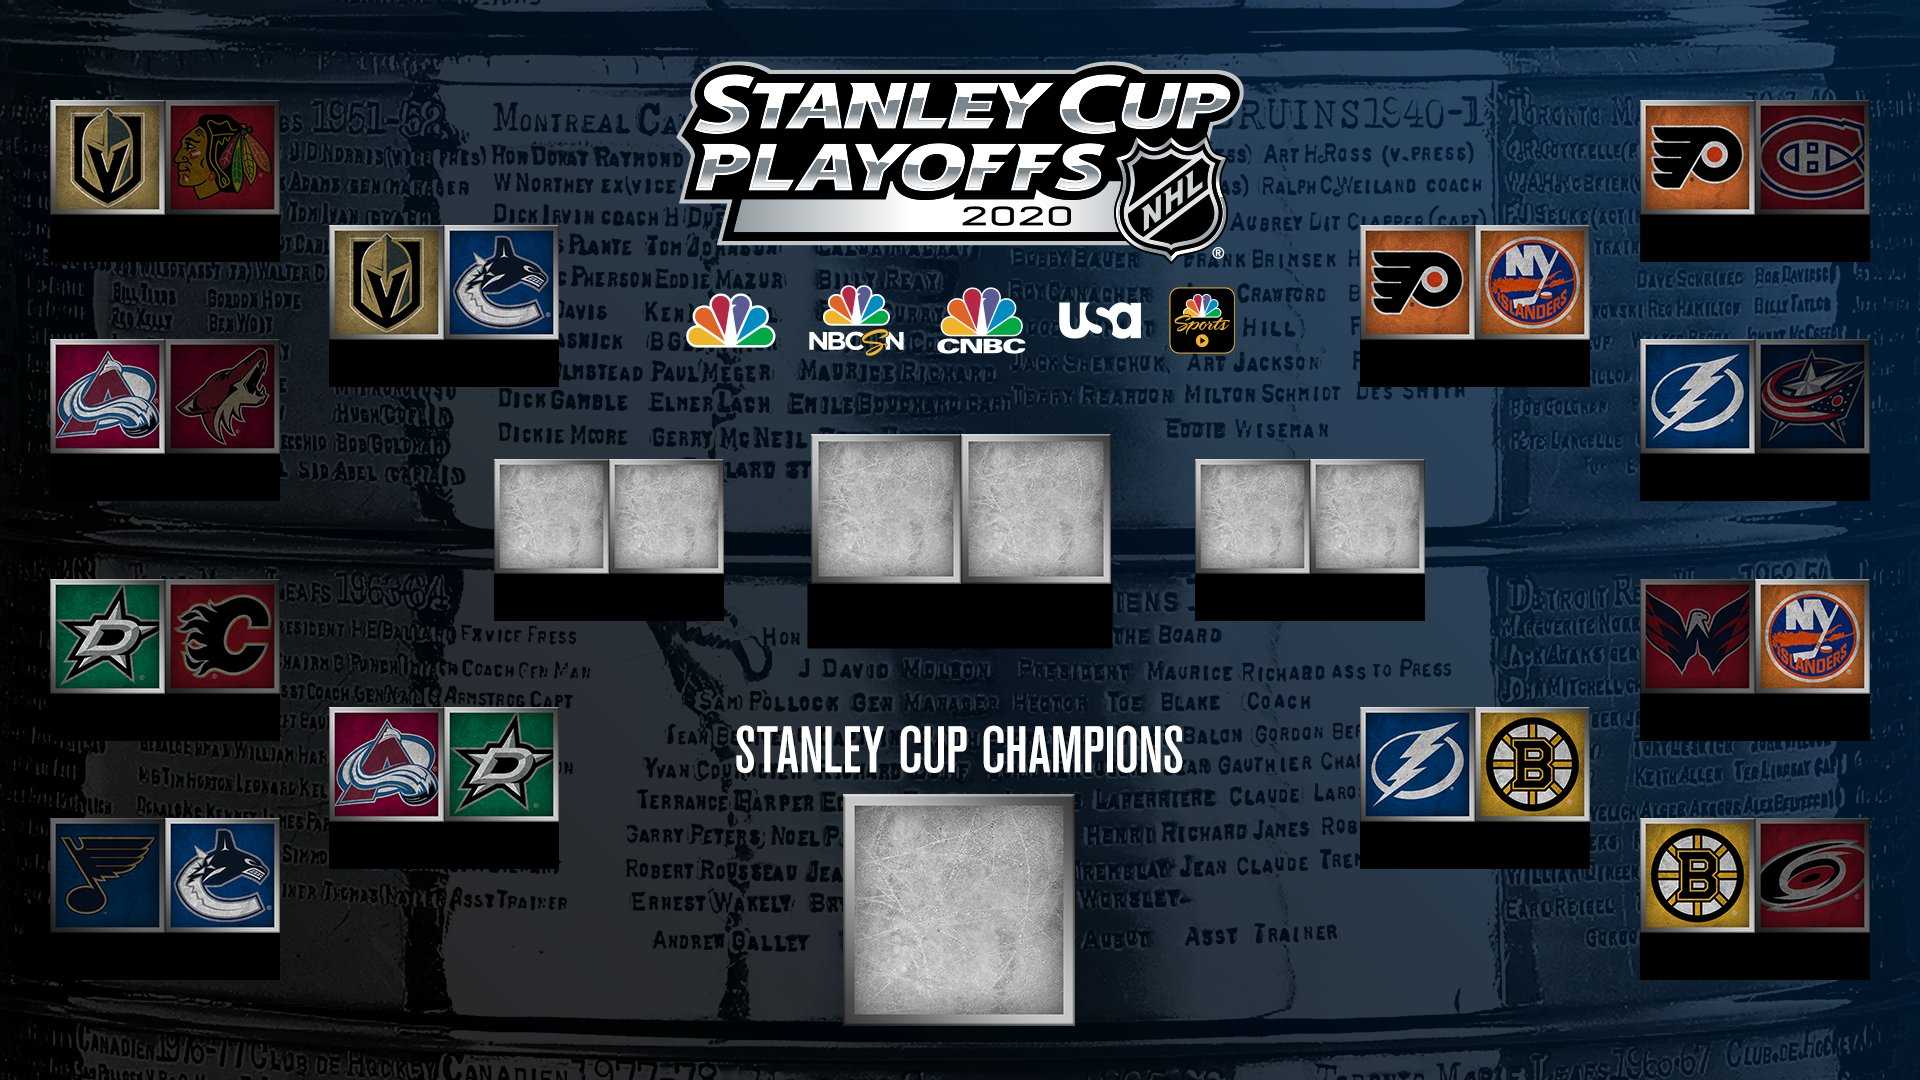  Conference Semi-Finals – 2020 Stanley Cup Playoffs